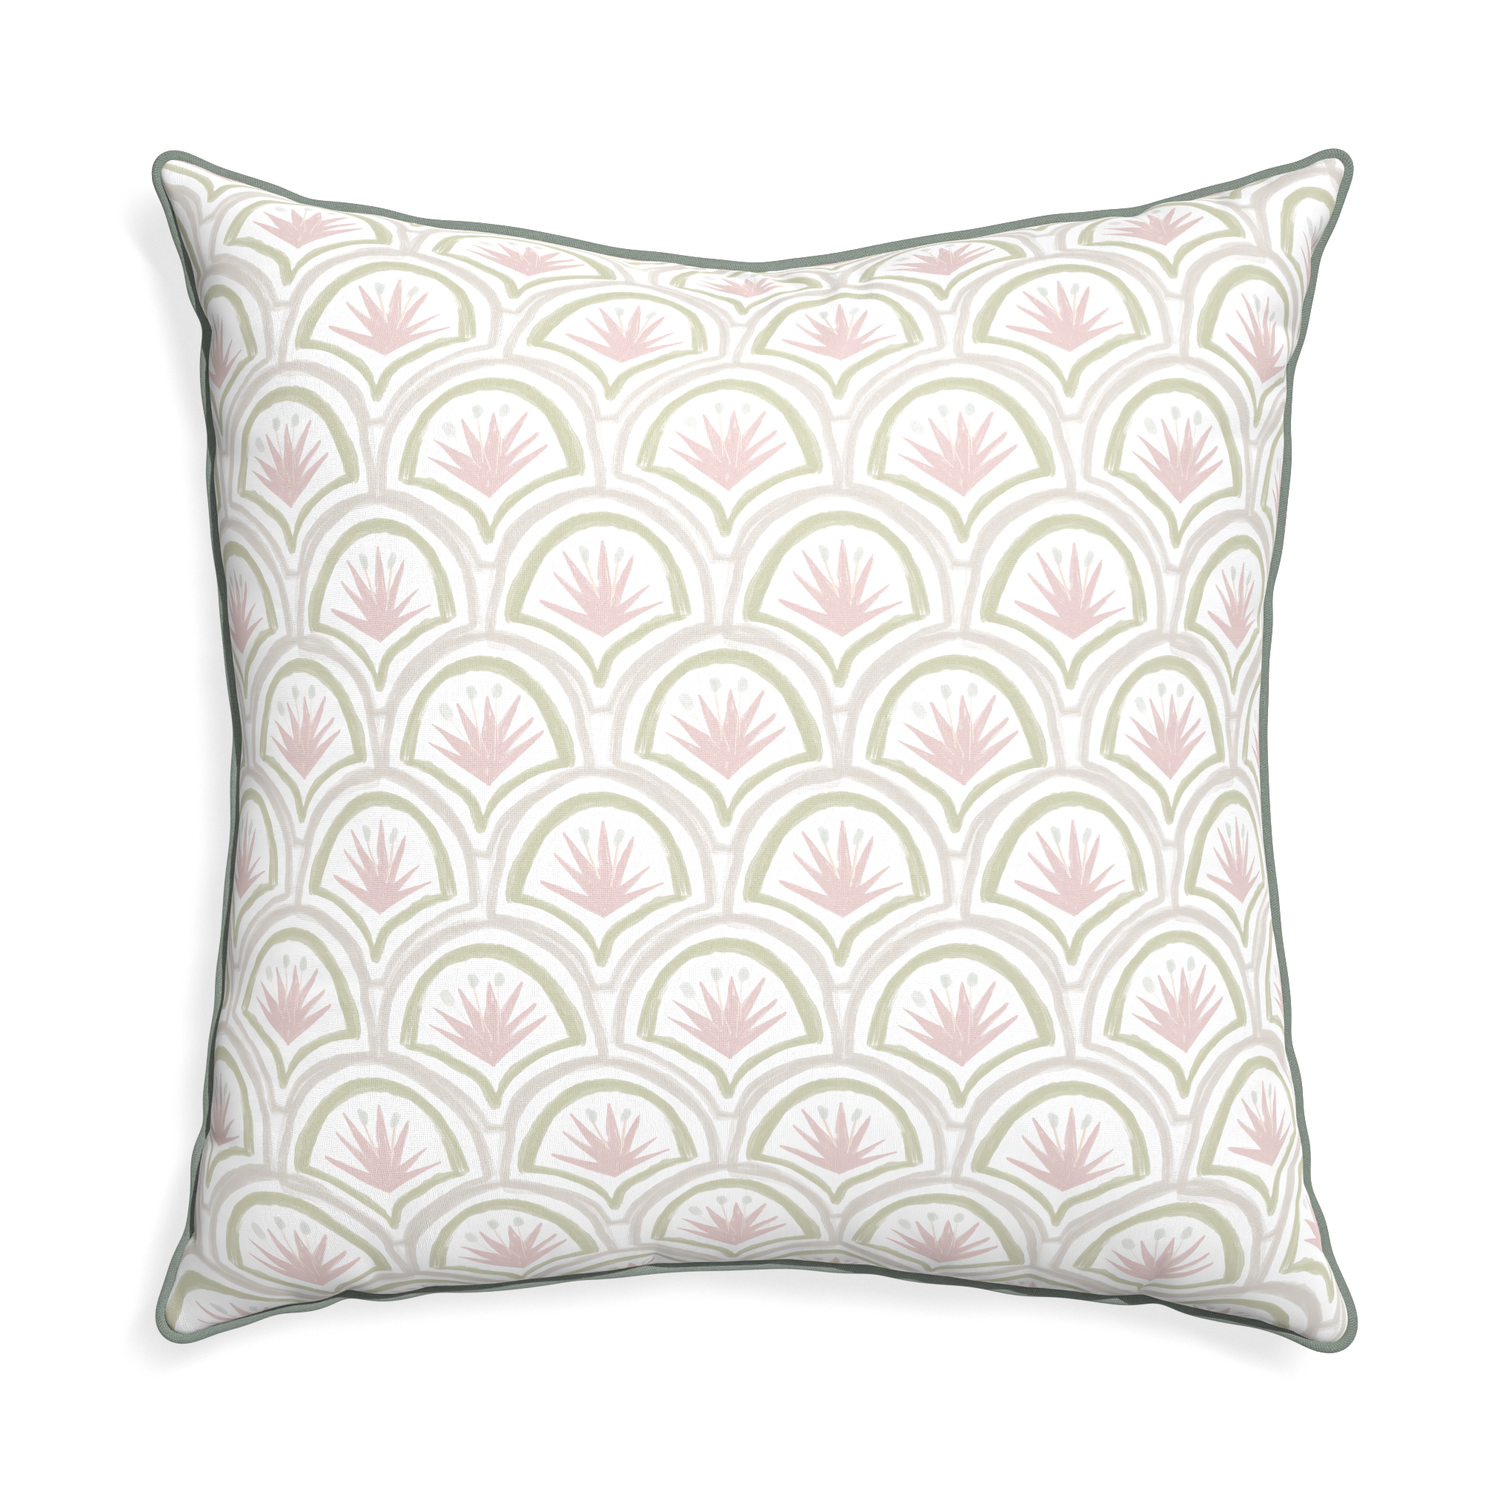 Euro-sham thatcher rose custom pink & green palmpillow with sage piping on white background